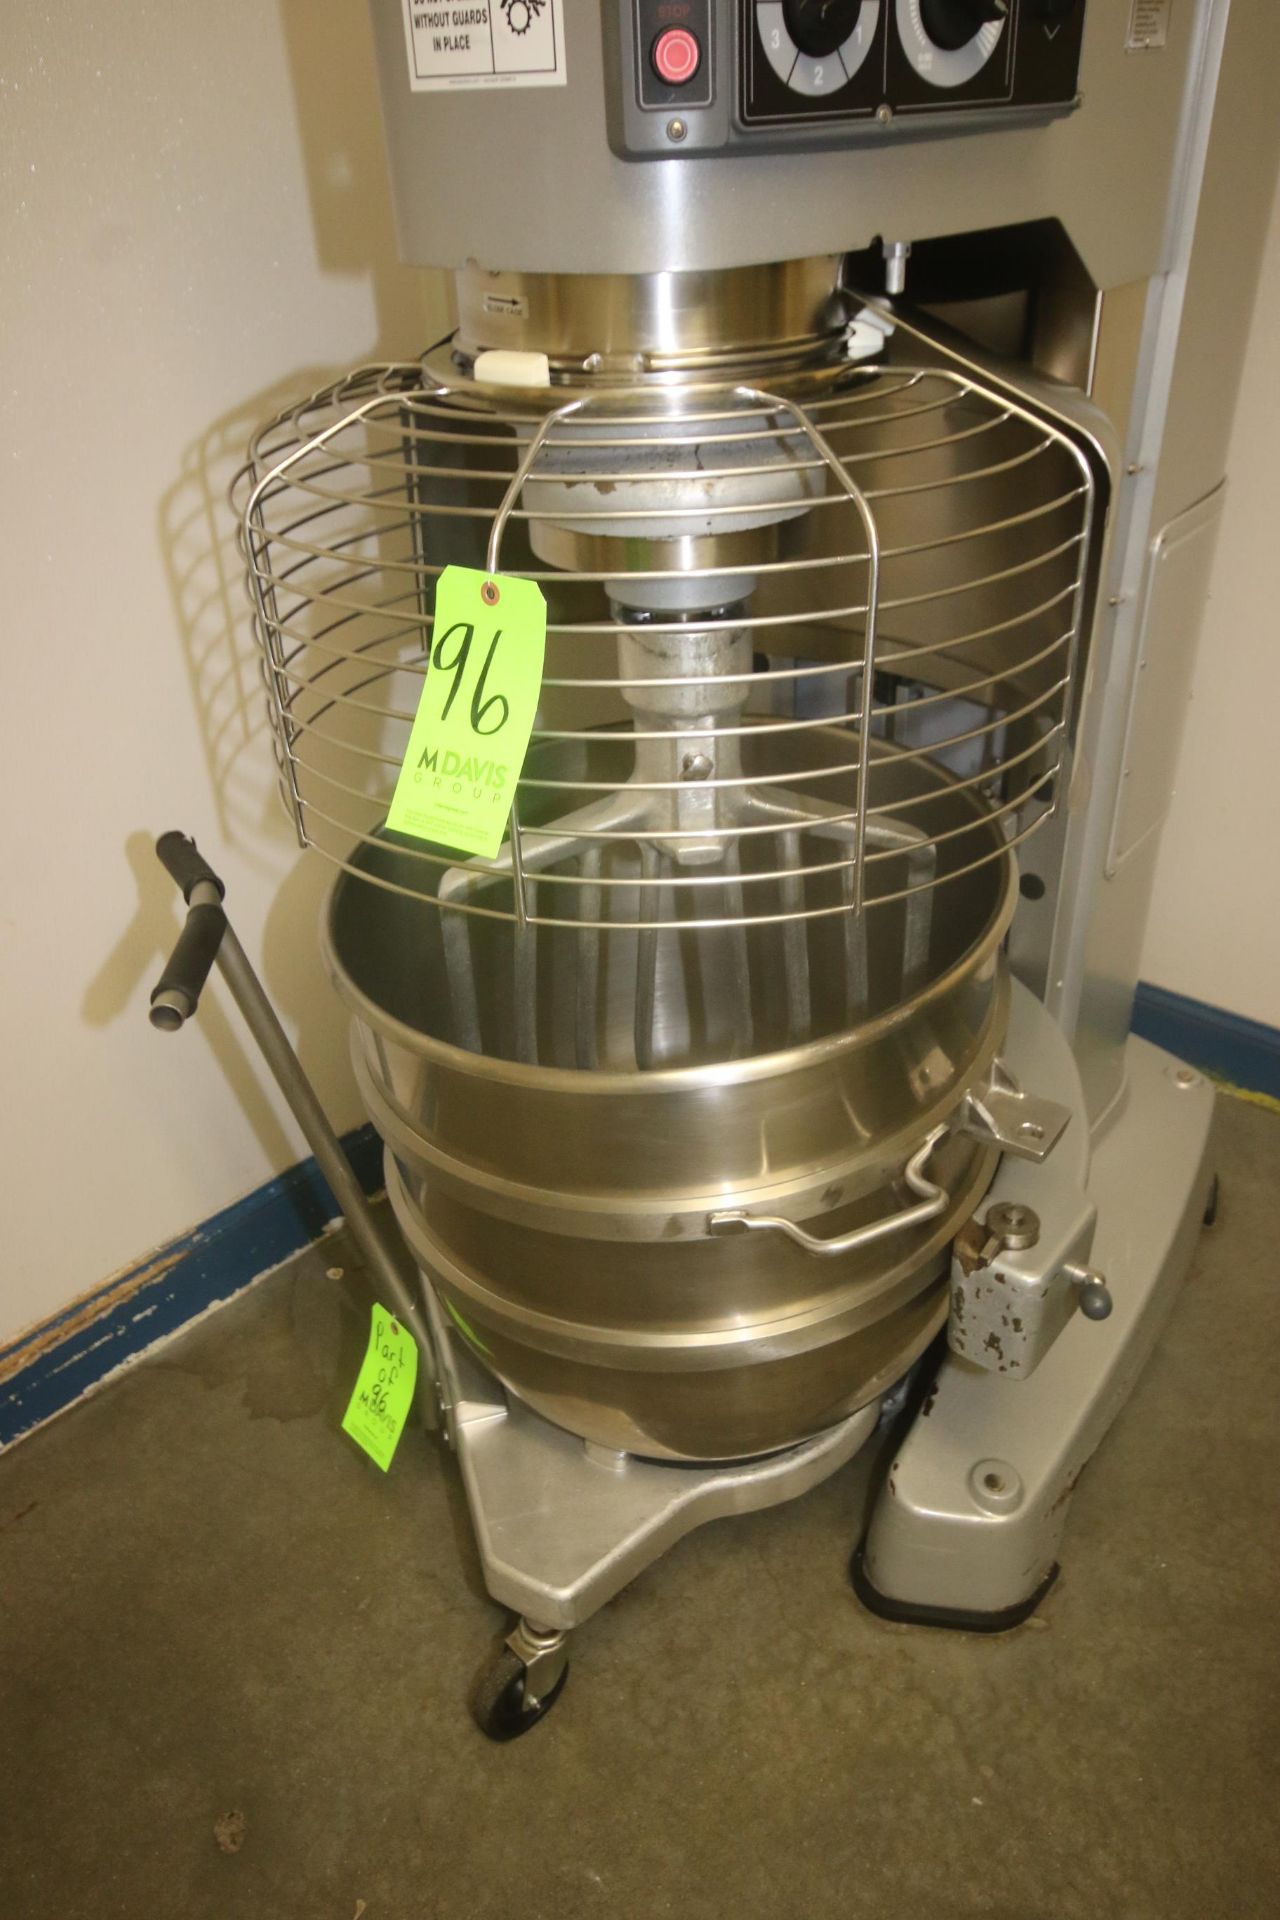 Hobart Legacy Mixer, M/N HL1400, S/N 31-1499-829, with 5 hp Motor, 1200 RPM, 200-240 Volts, 3 Phase, - Image 9 of 10